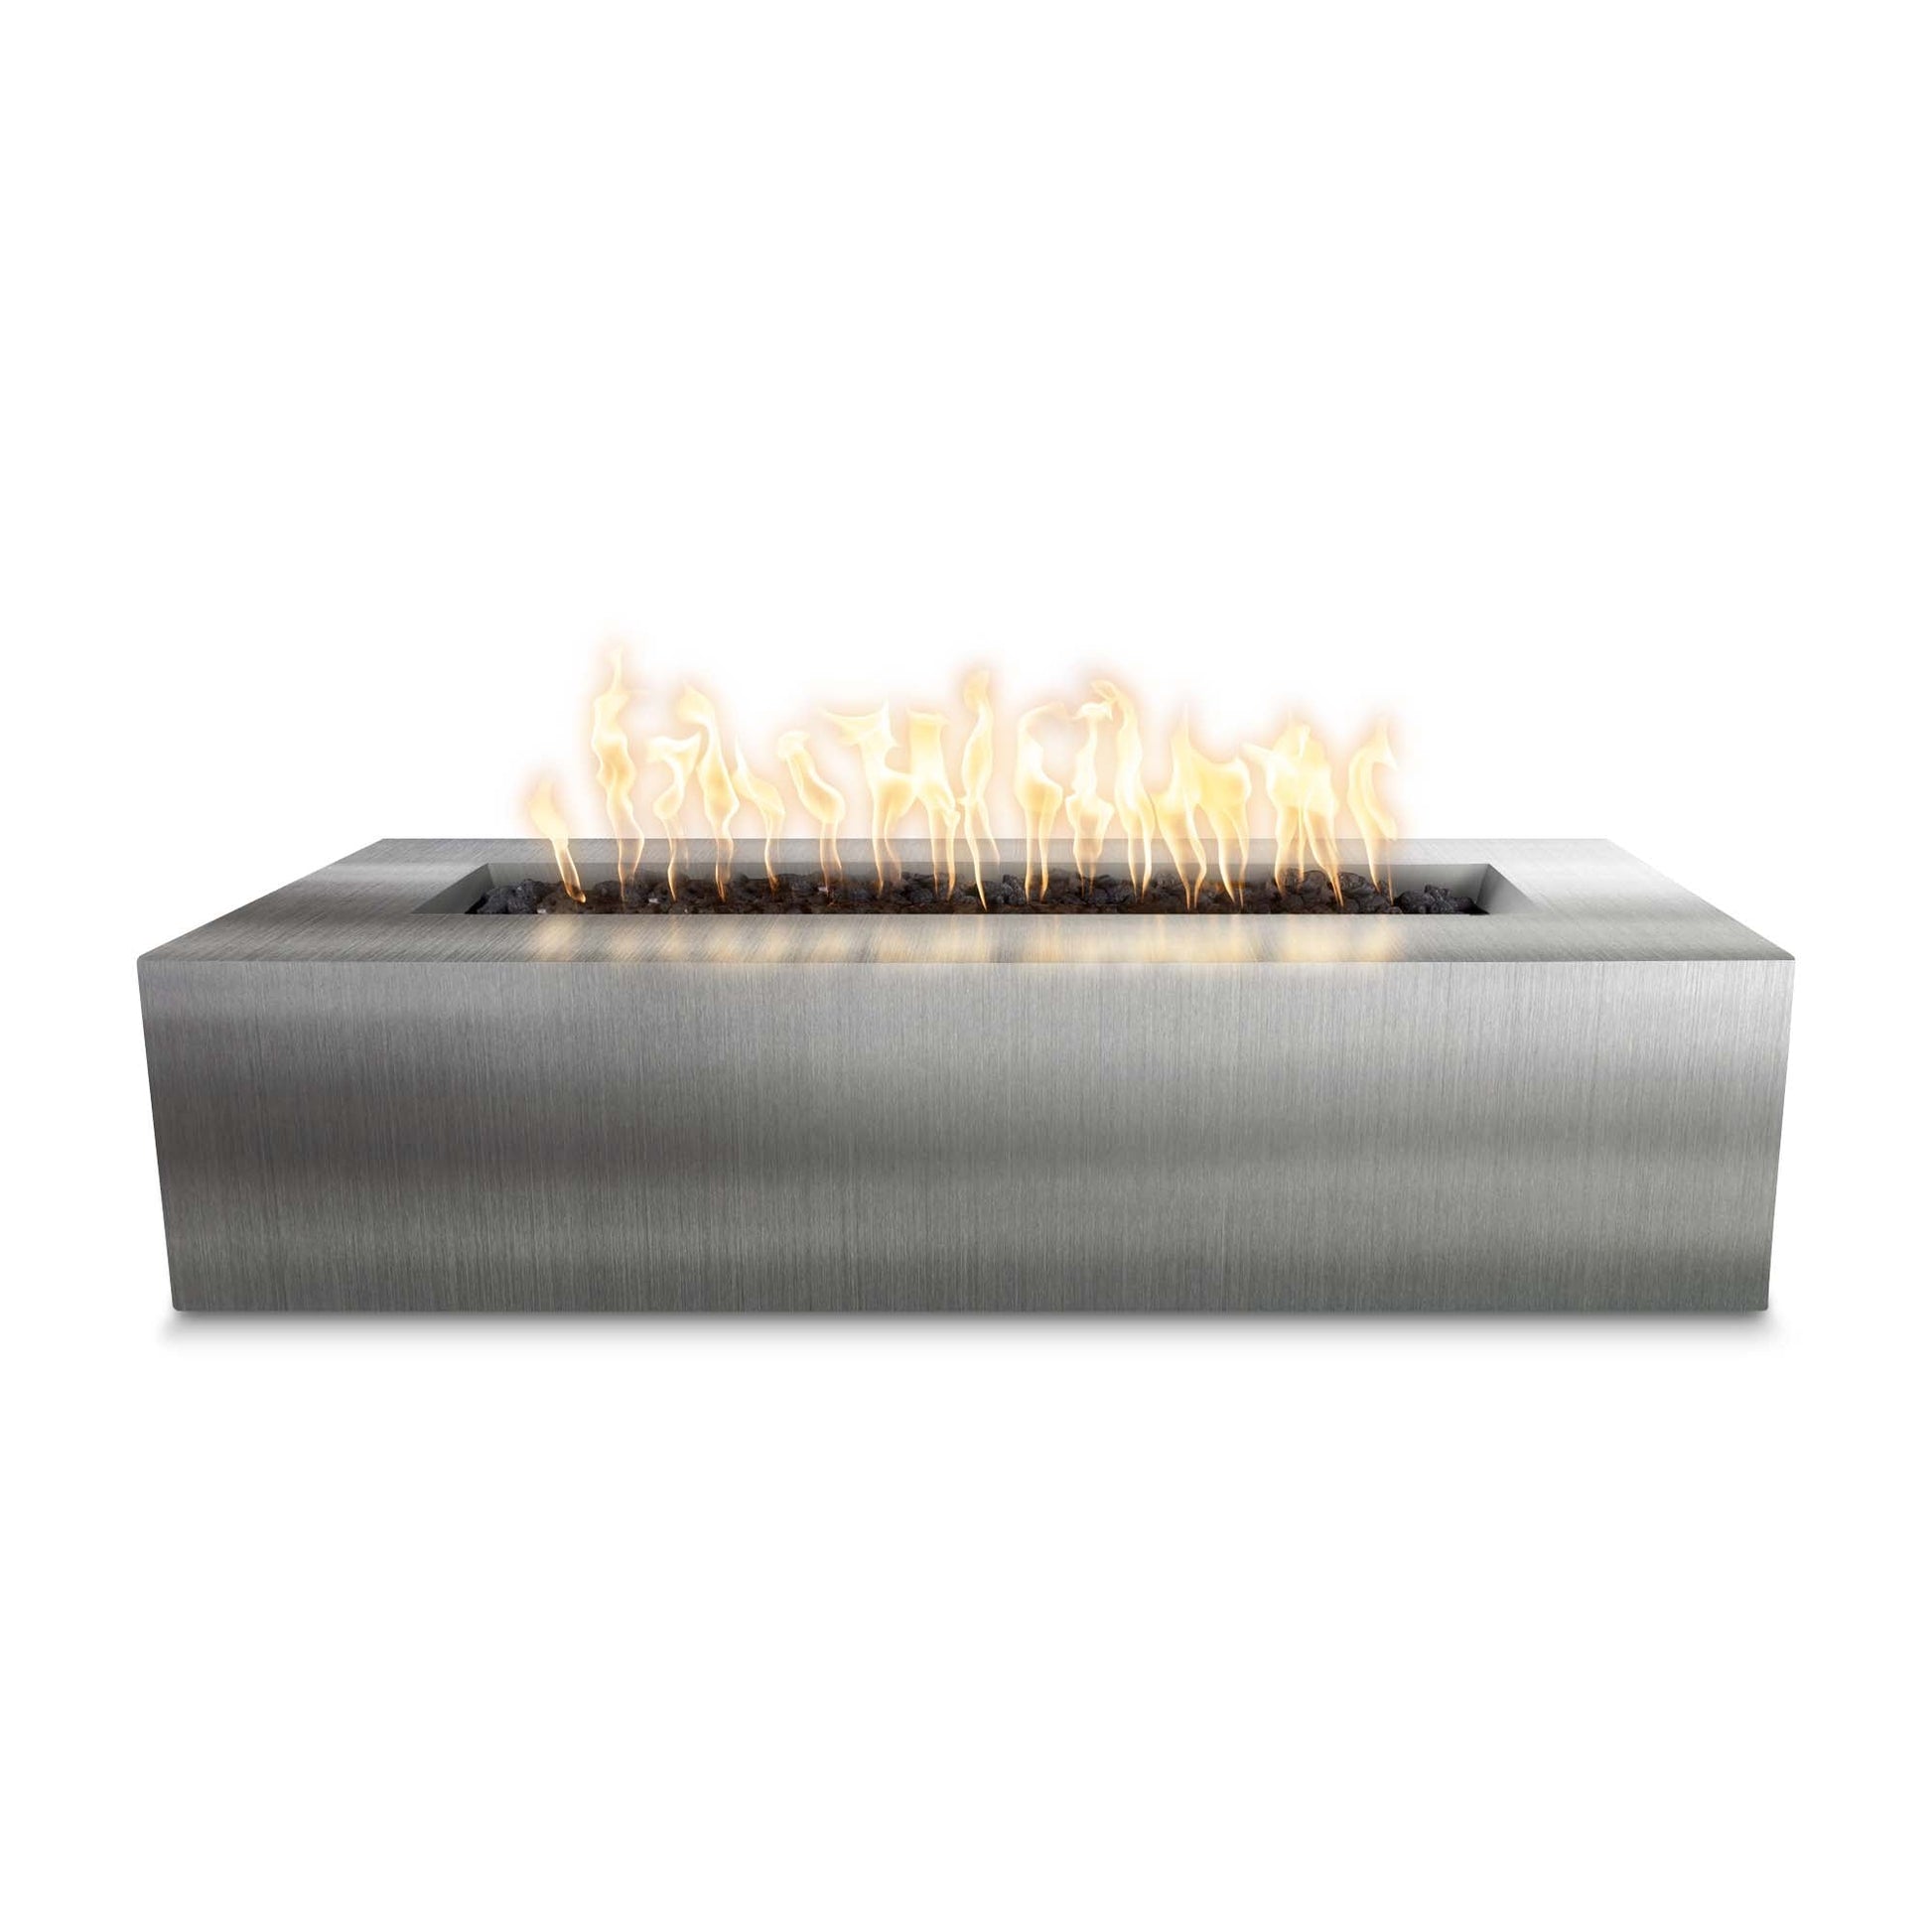 The Outdoor Plus Rectangular Regal 60" Stainless Steel Liquid Propane Fire Pit with Match Lit with Flame Sense Ignition